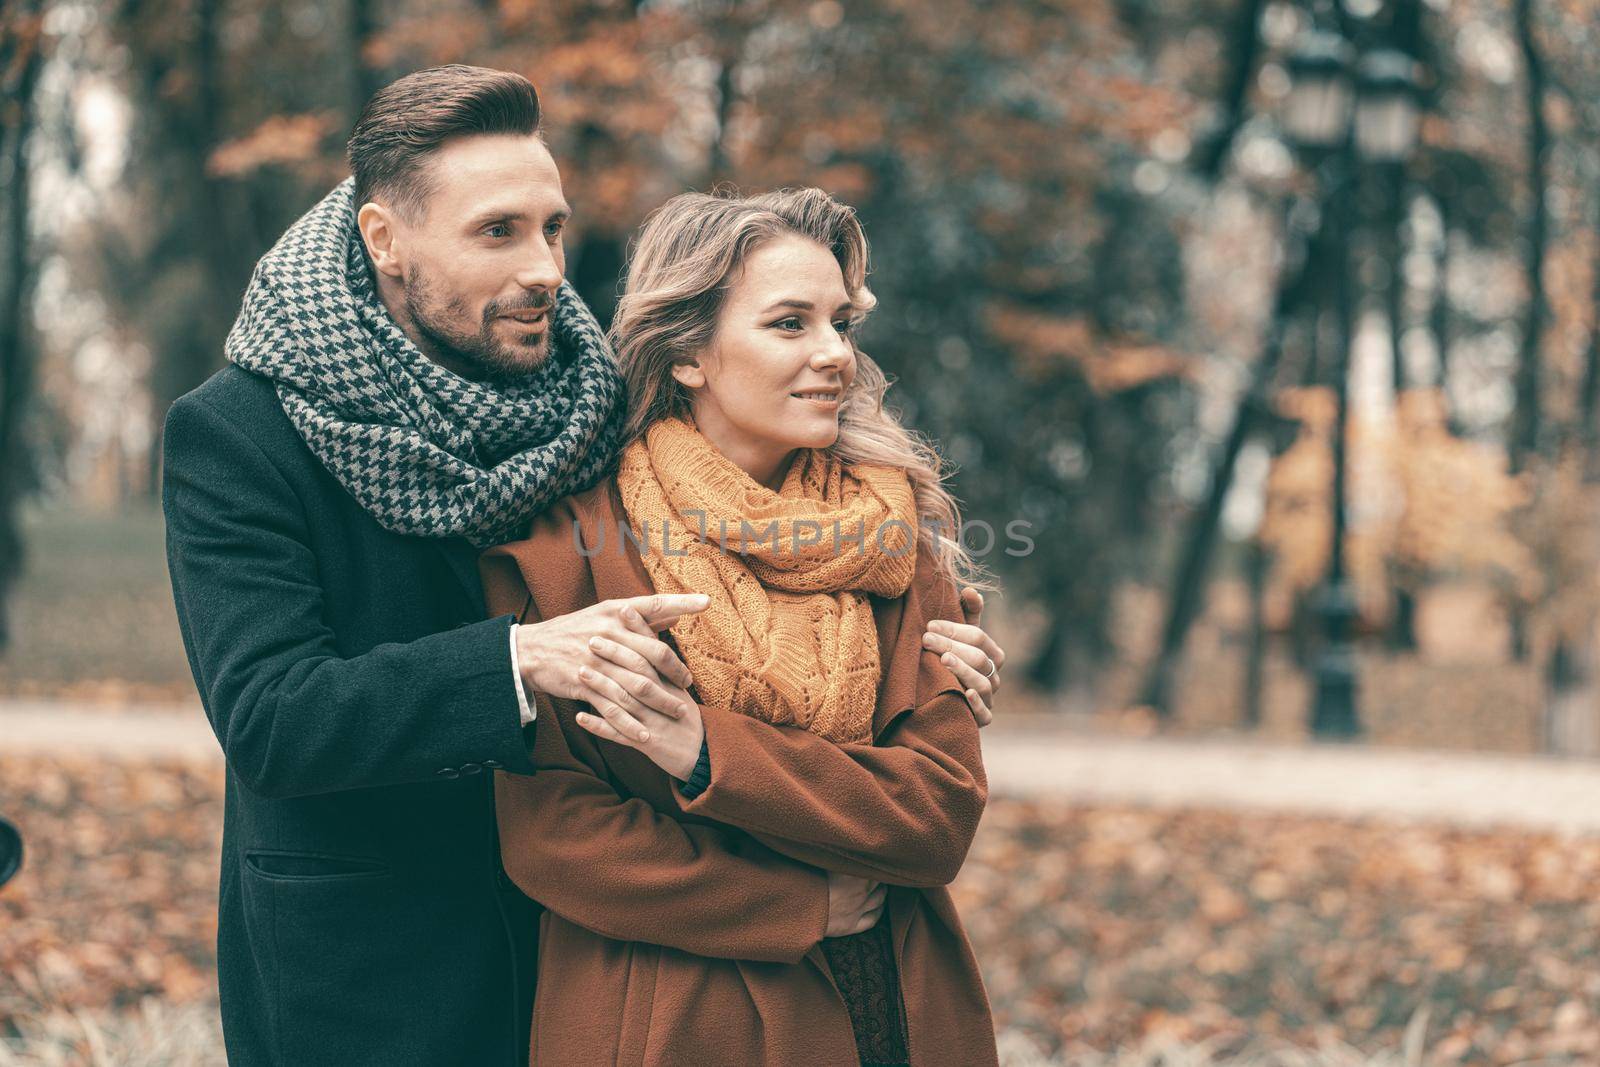 Man hugging woman standing behind her looking one direction sideways in the autumn park. Outdoor shot of a young couple in love having great time having a hug in a autumn park. Close up. Tinted image.